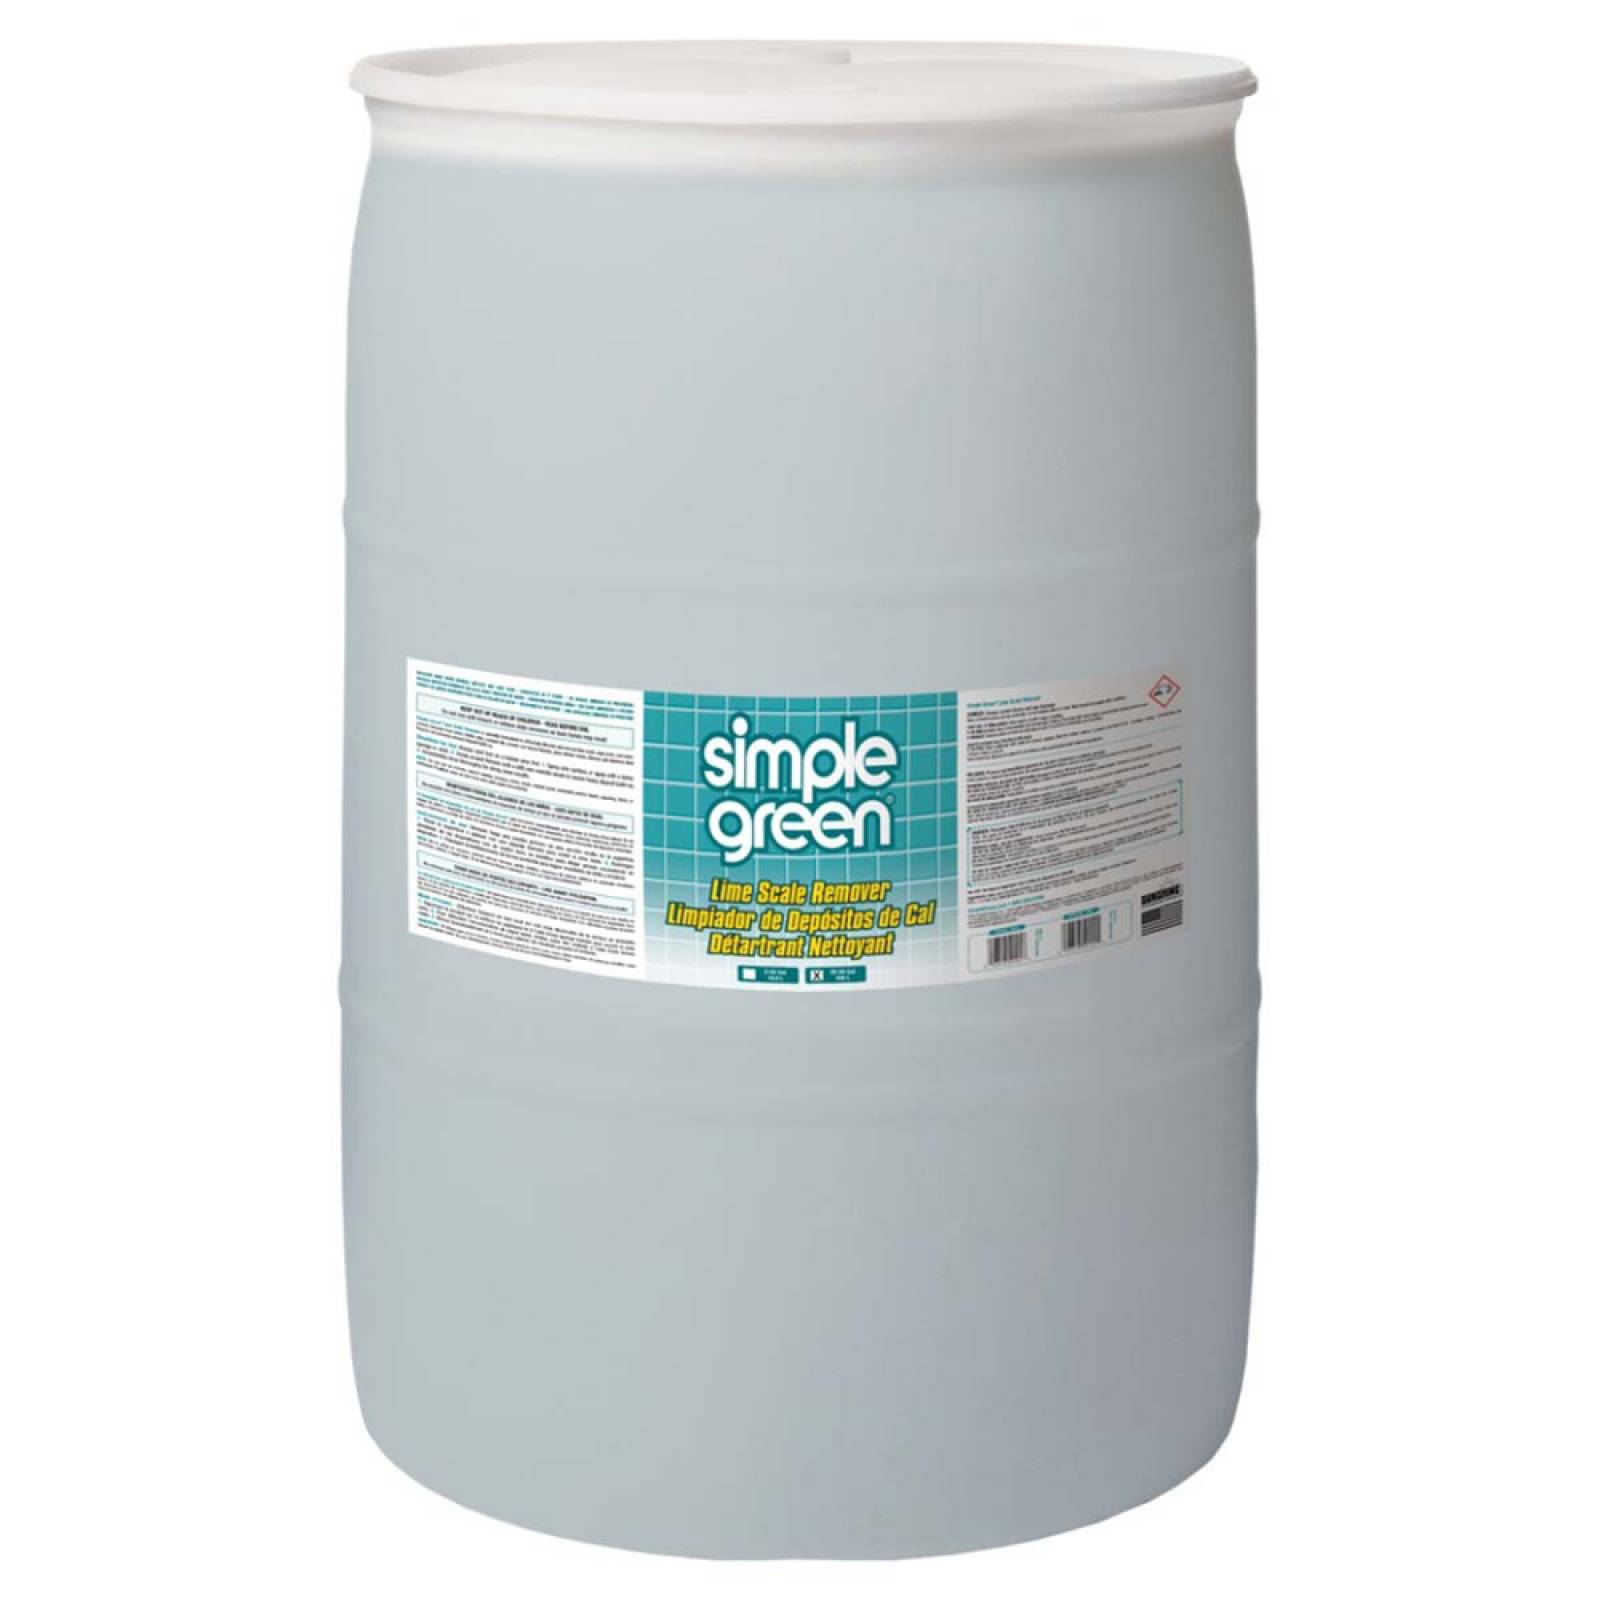 Simple Green Lime Scale Remover 55 Gallon Pail 